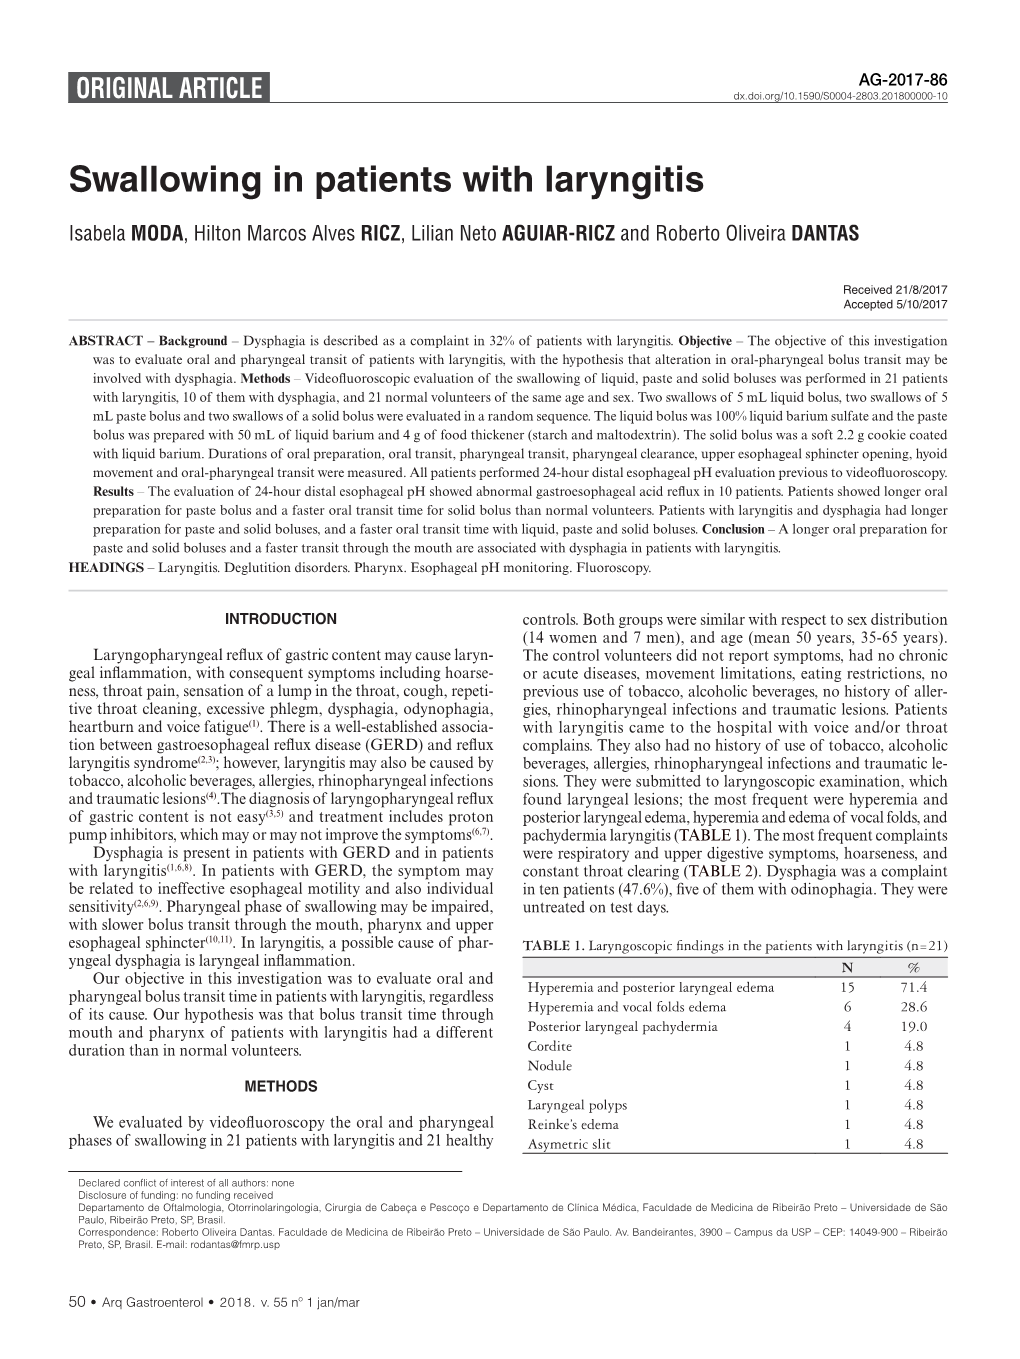 Swallowing in Patients with Laryngitis